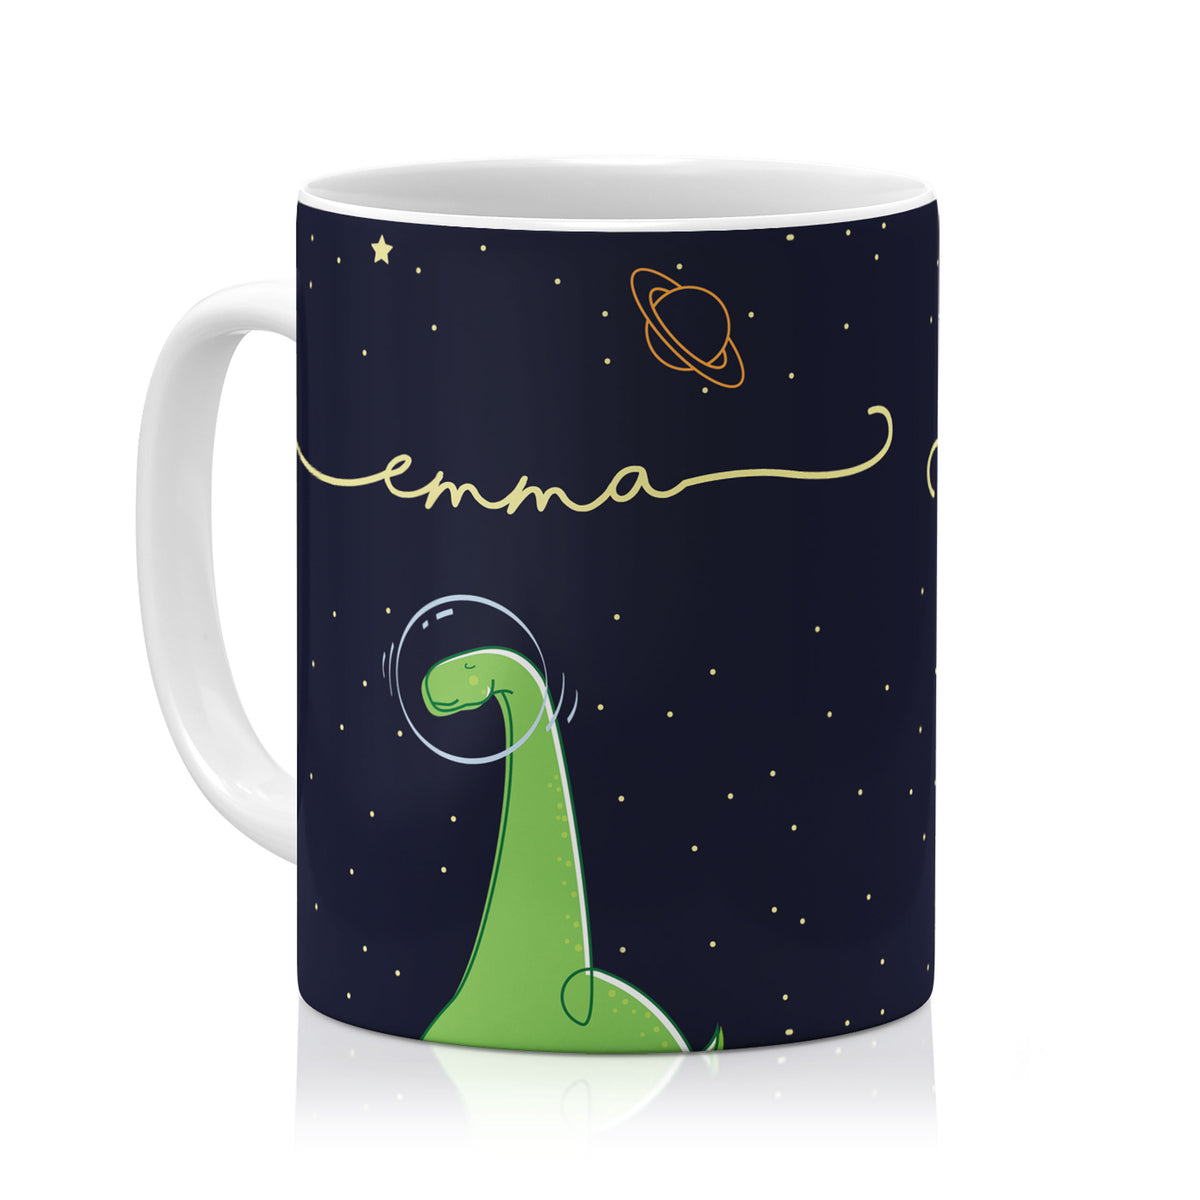 Personalised Ceramic Mug with Name Initials Text Space Dinnosaur Bubble